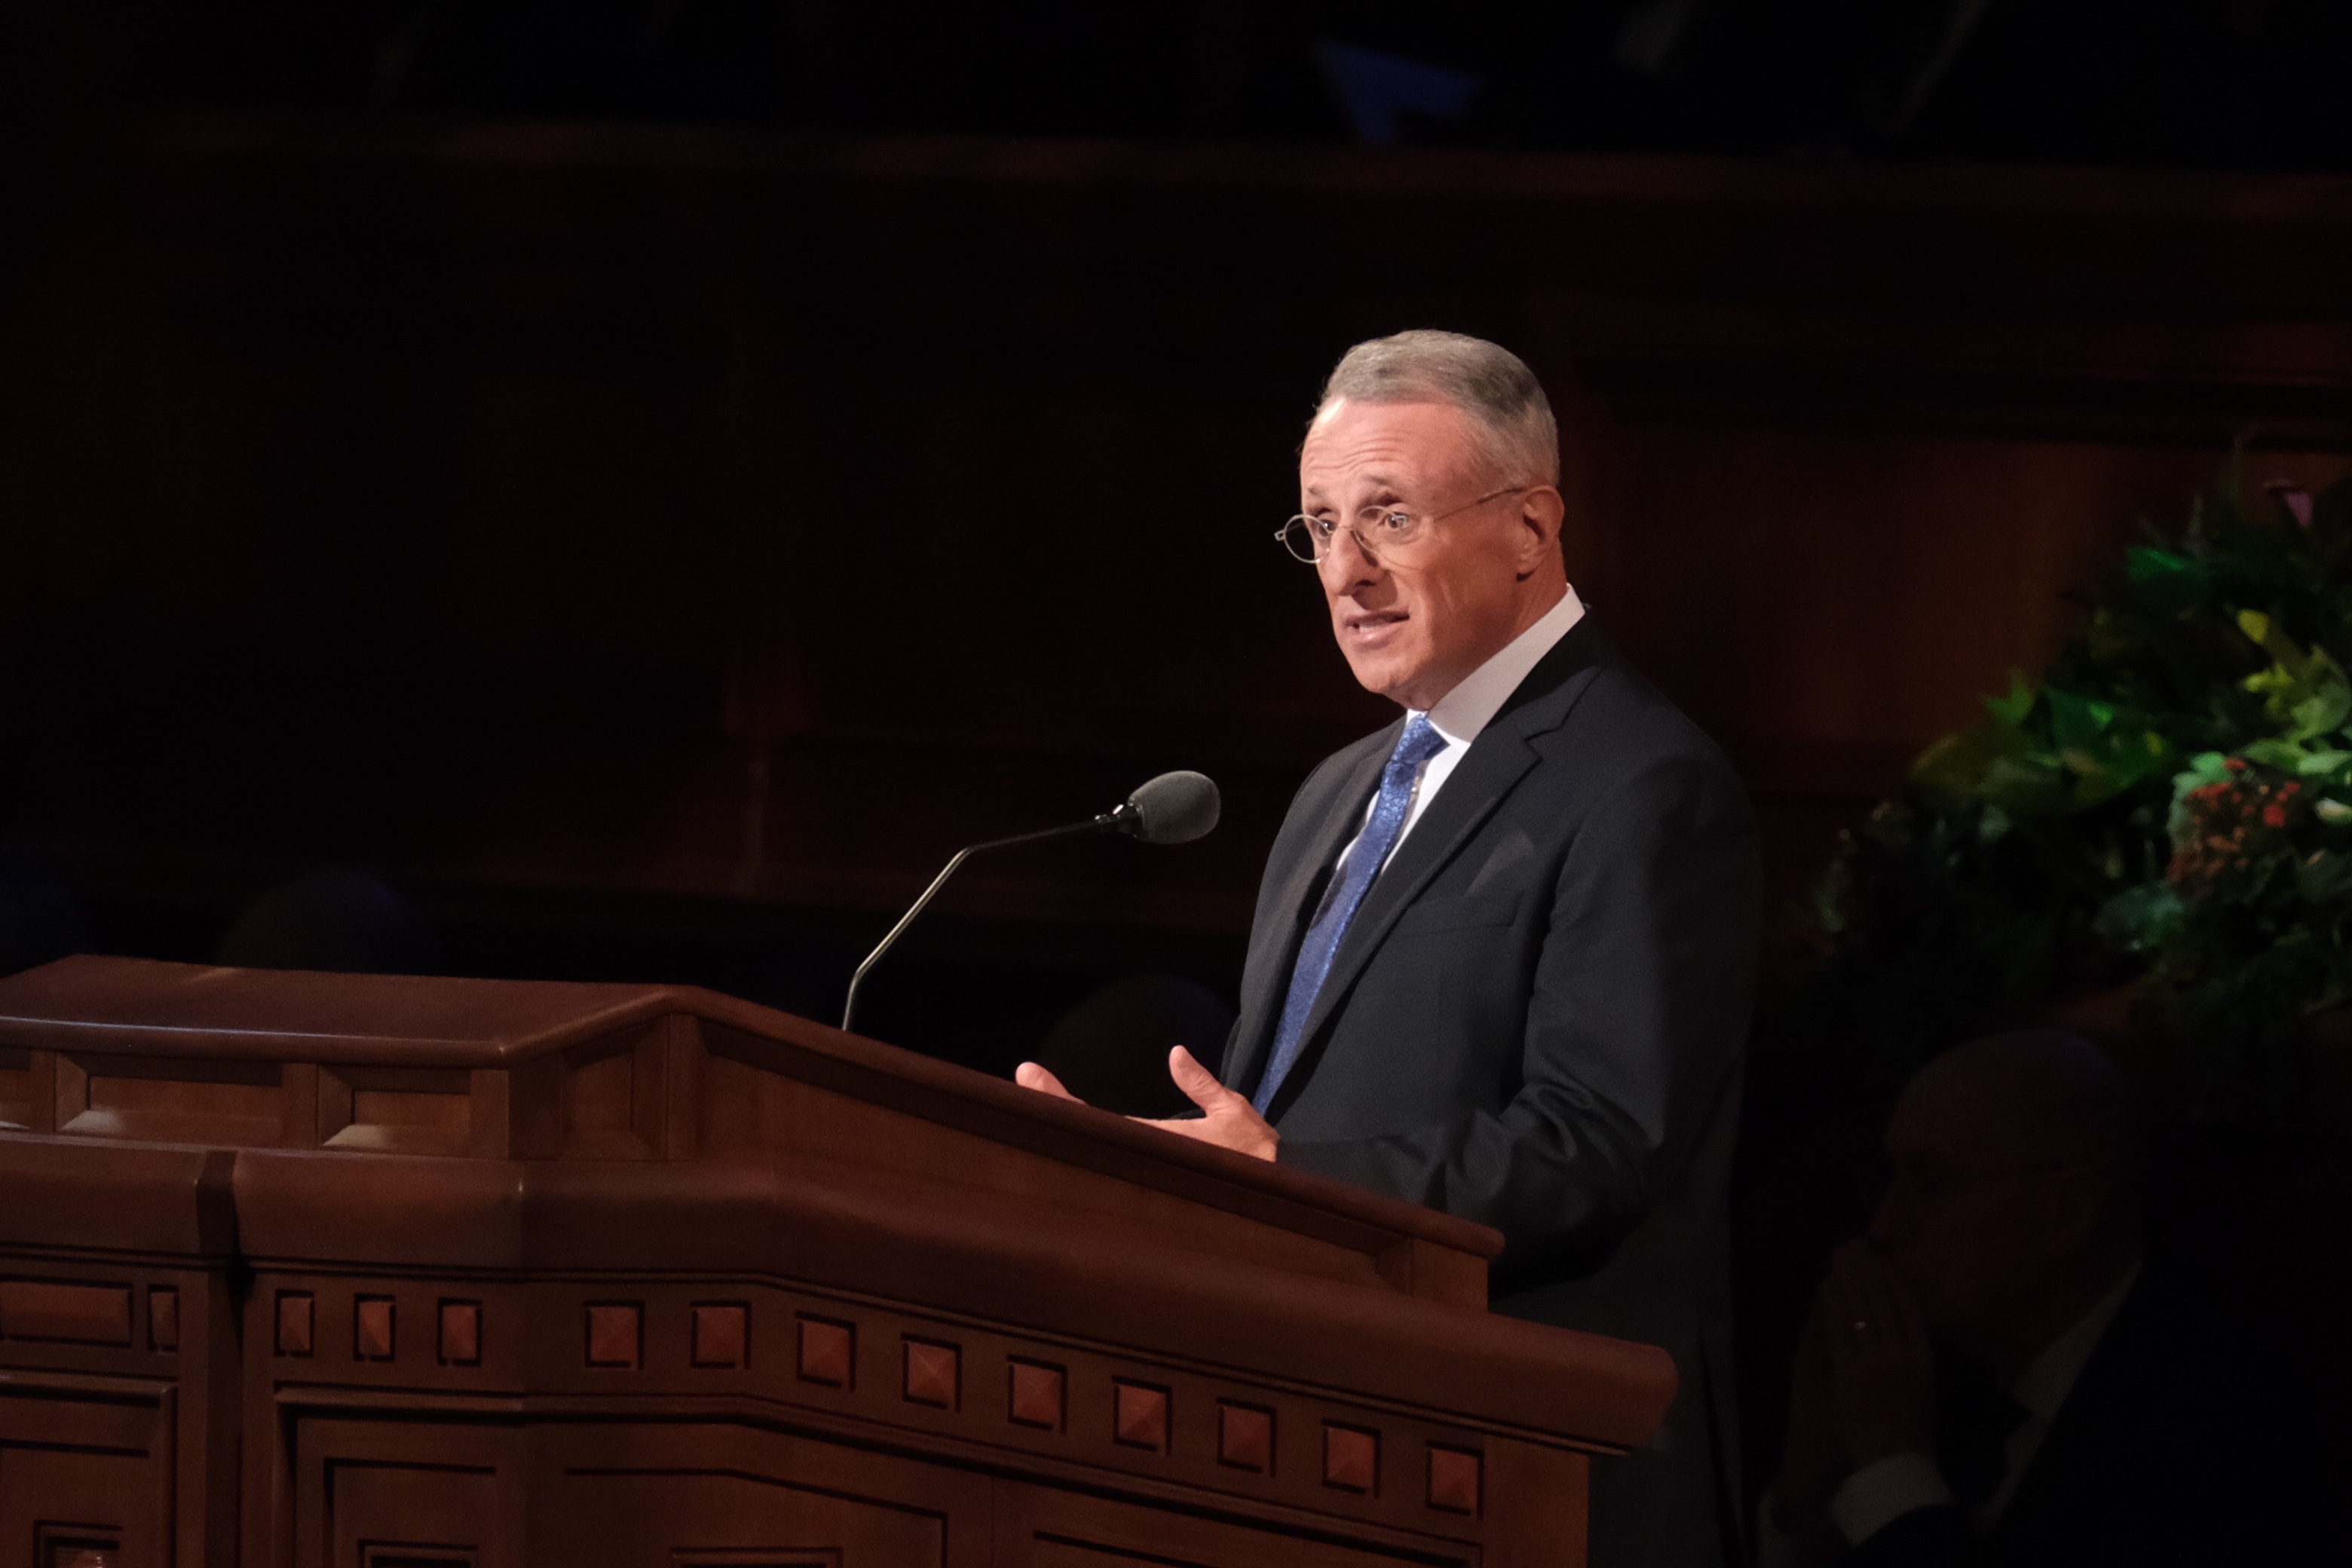 Elder Sabin shares 8 principles of peace and happiness with BYU